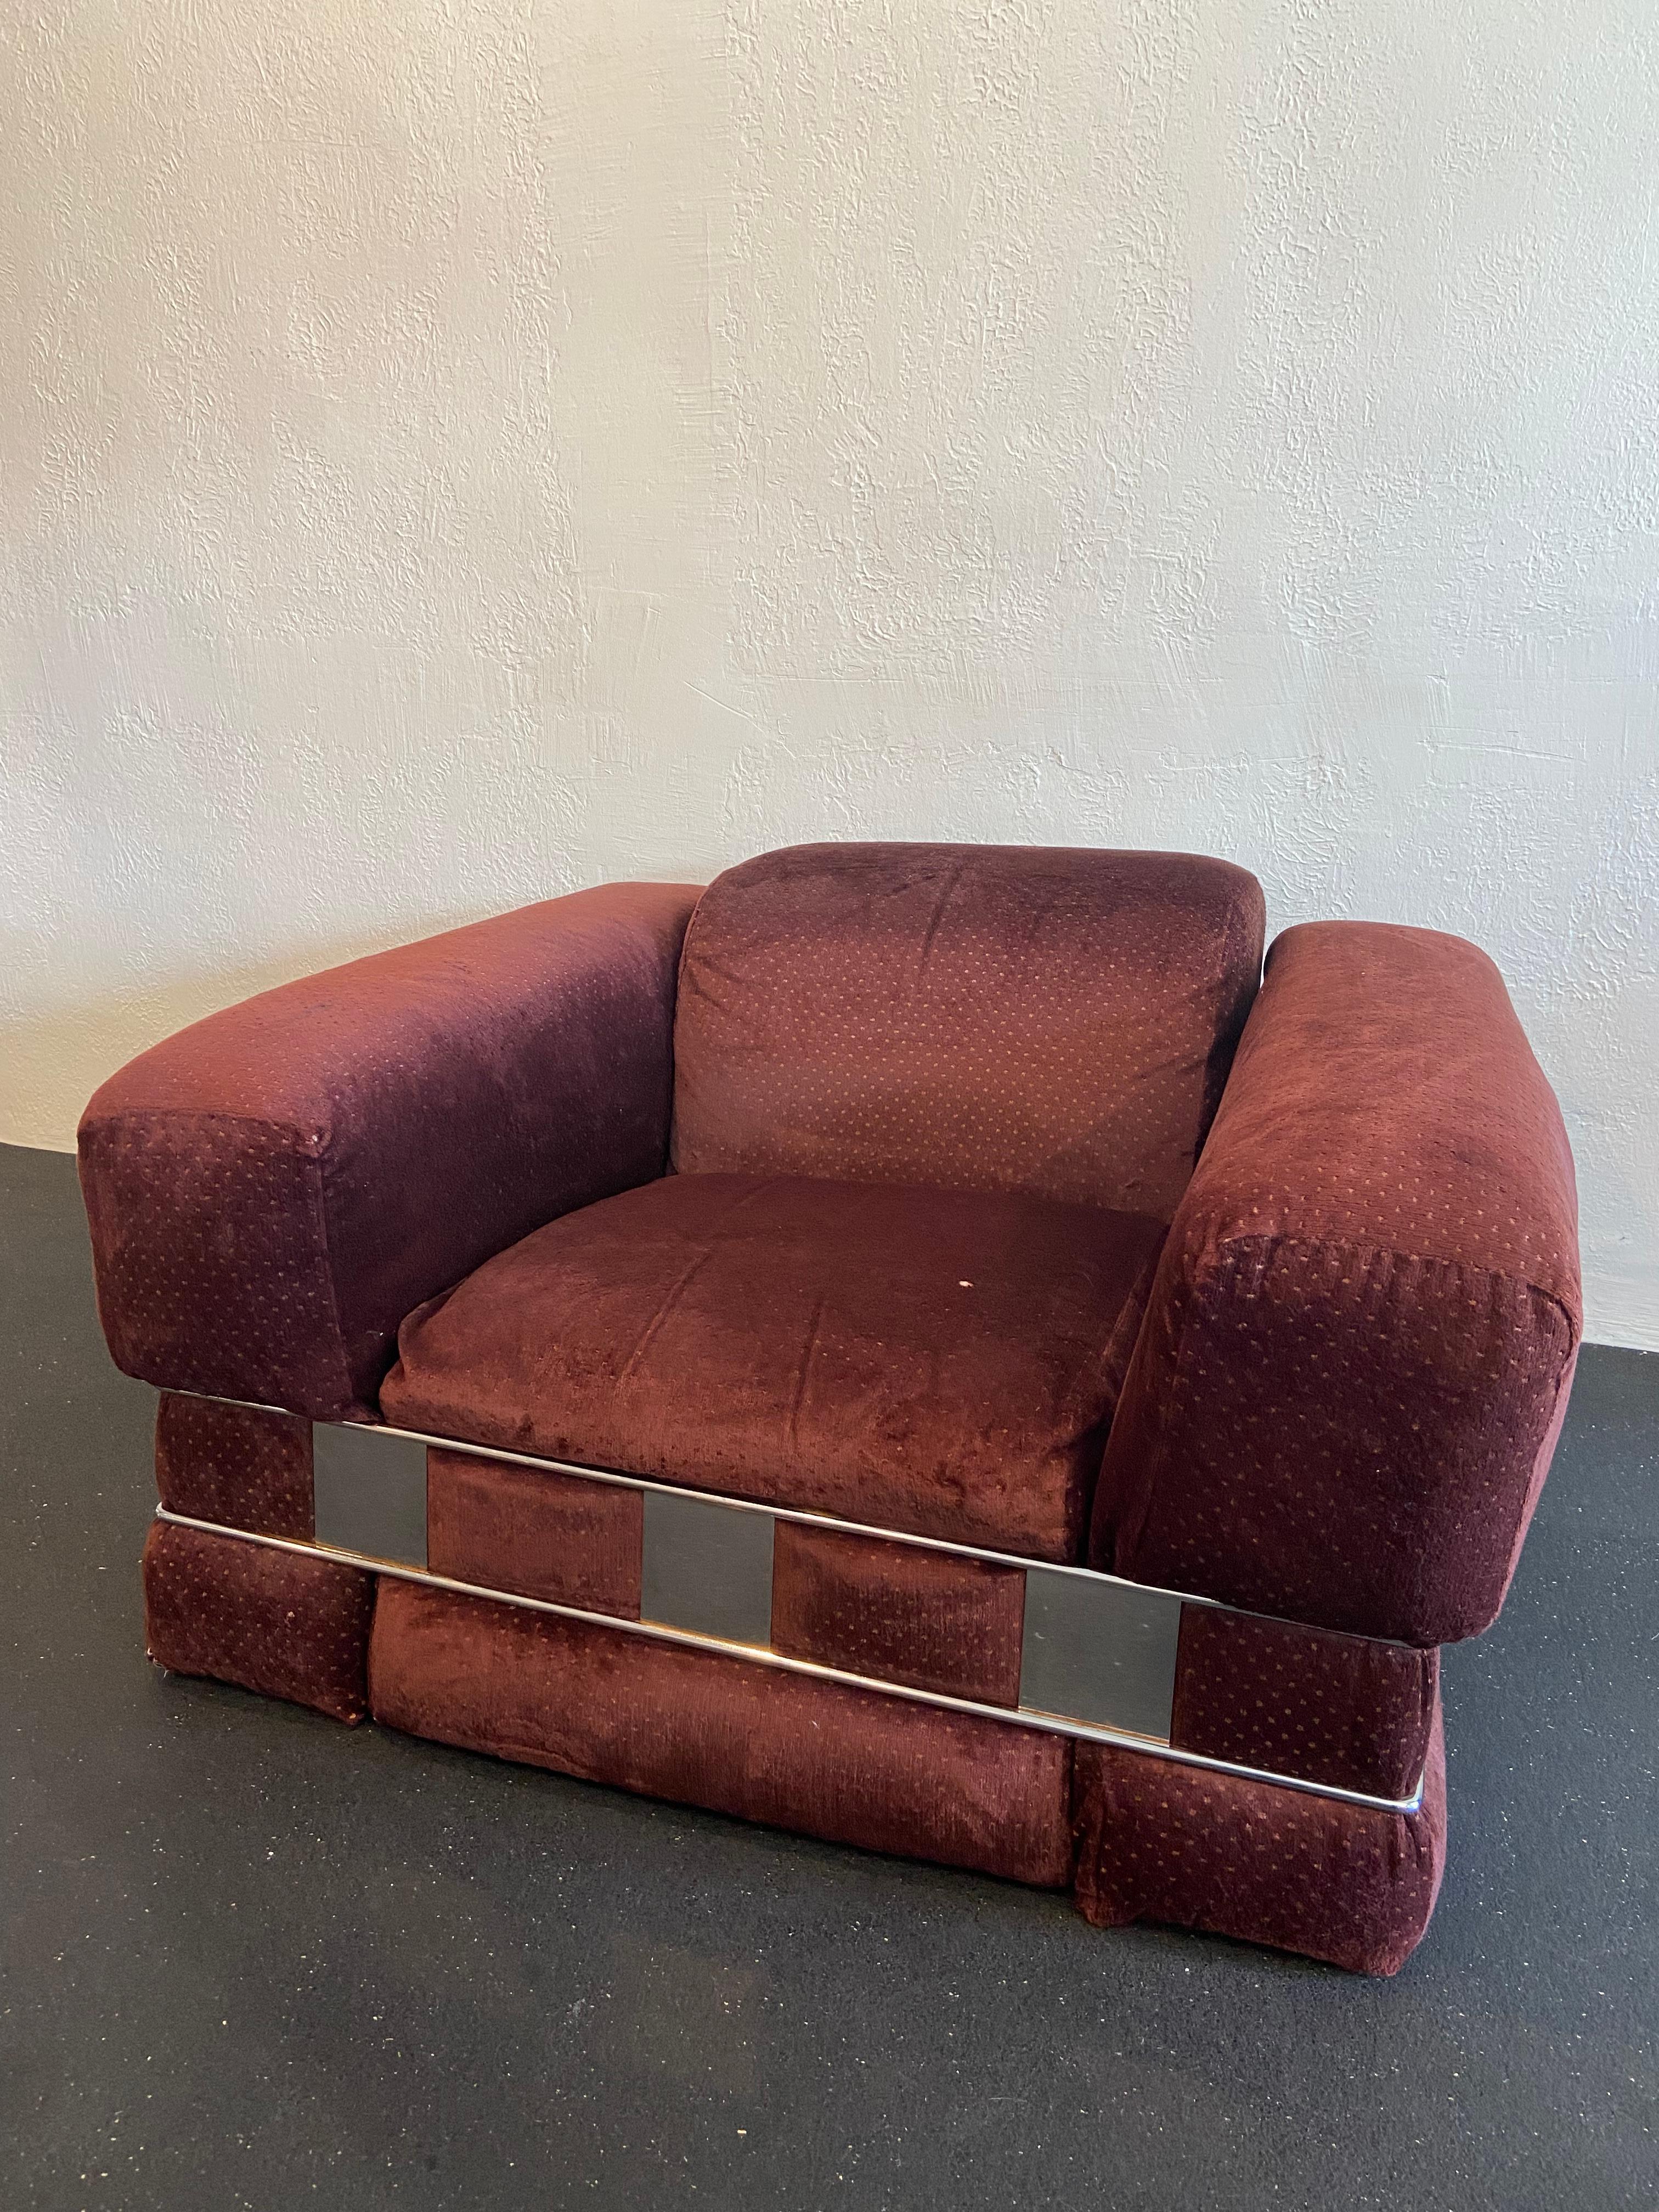 Adrian Pearsall for Craft Associates chrome caged chair. Signed. Matching sofa available in separate listing. Fabric shows signs of wear thus reupholstery is highly recommended. Oxidation/patina present in some of the crevasses of the frame. (Please